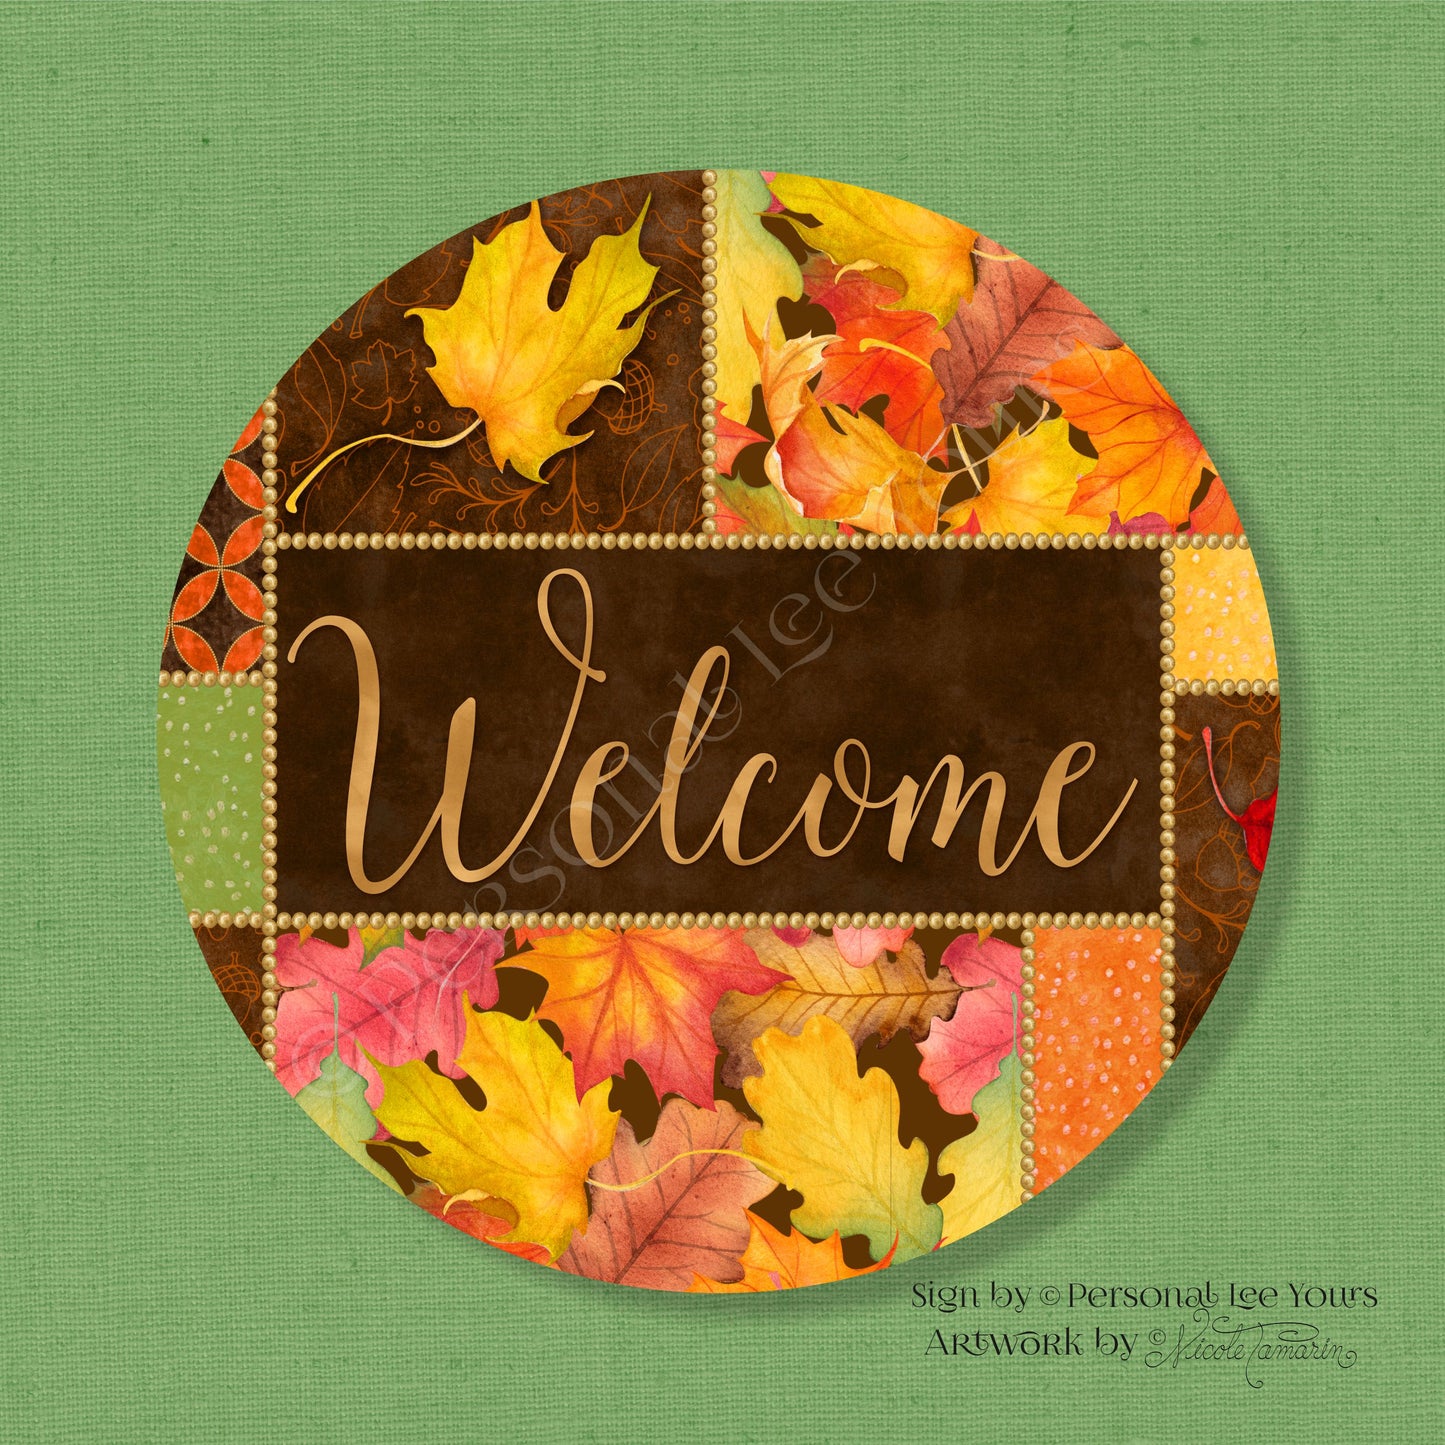 Nicole Tamarin Exclusive Sign * Colors Of Autumn Welcome * Round * Lightweight Metal